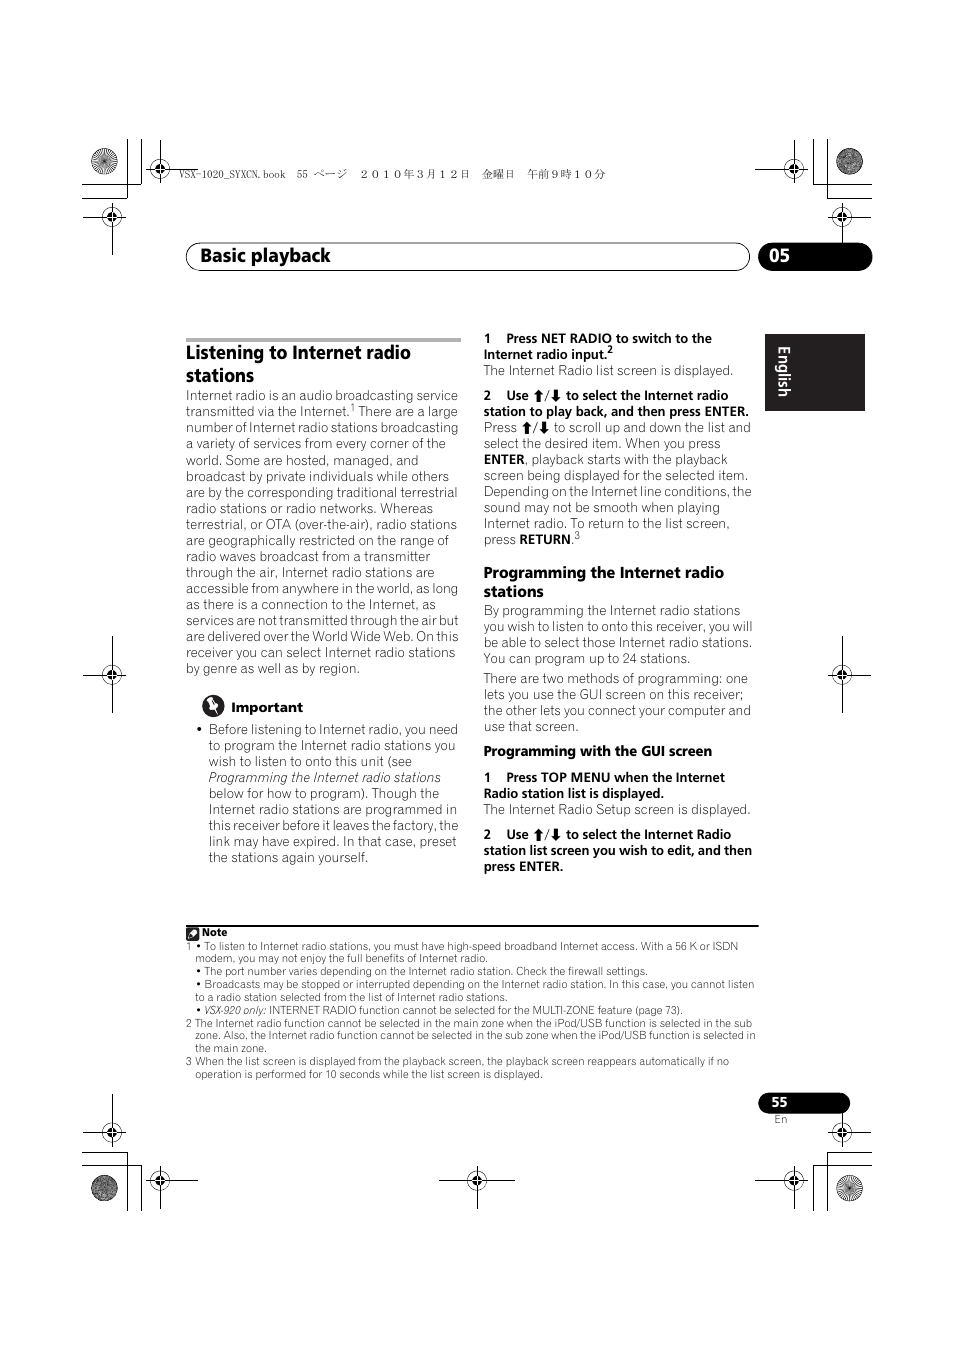 Listening to internet radio stations, Important, Programming the internet  radio stations | Pioneer VSX-920-K User Manual | Page 55 / 400